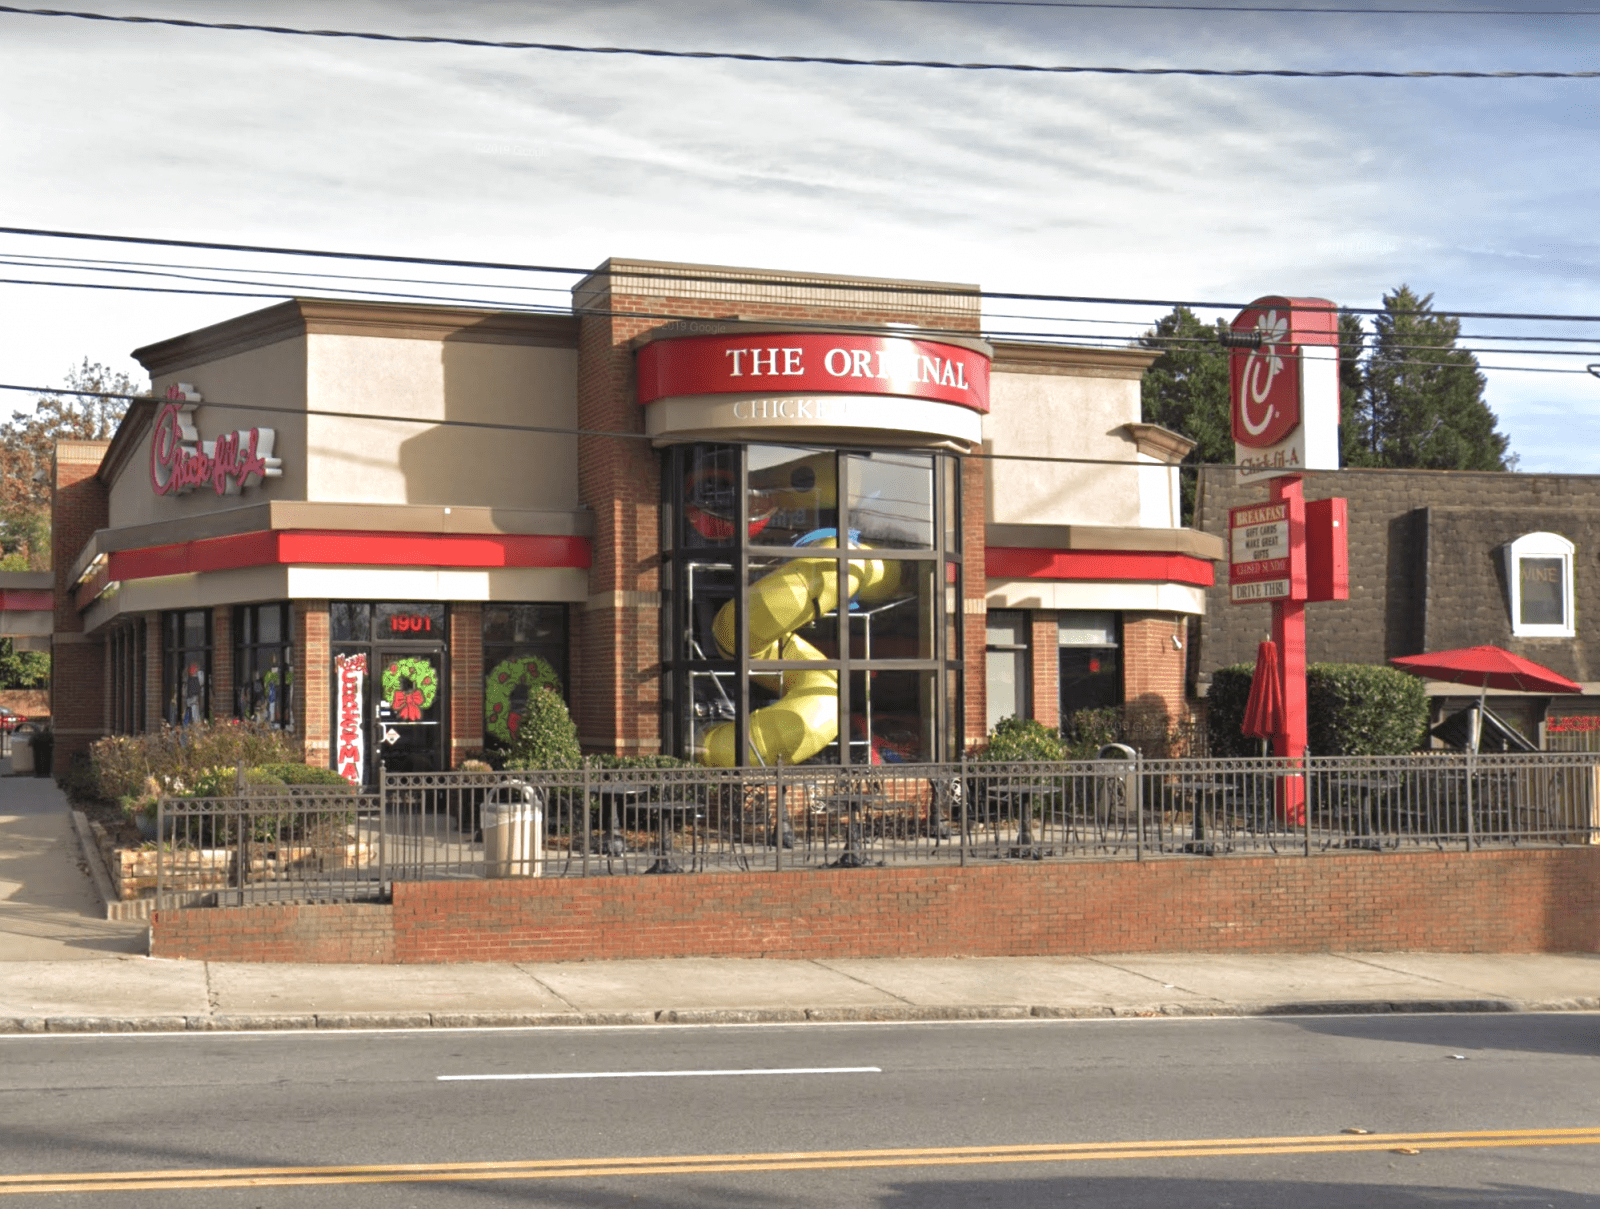 https://whatnowatlanta.com/wp-content/uploads/sites/2/2019/09/Peachtree-at-Collier-Chick-Fil-A.png